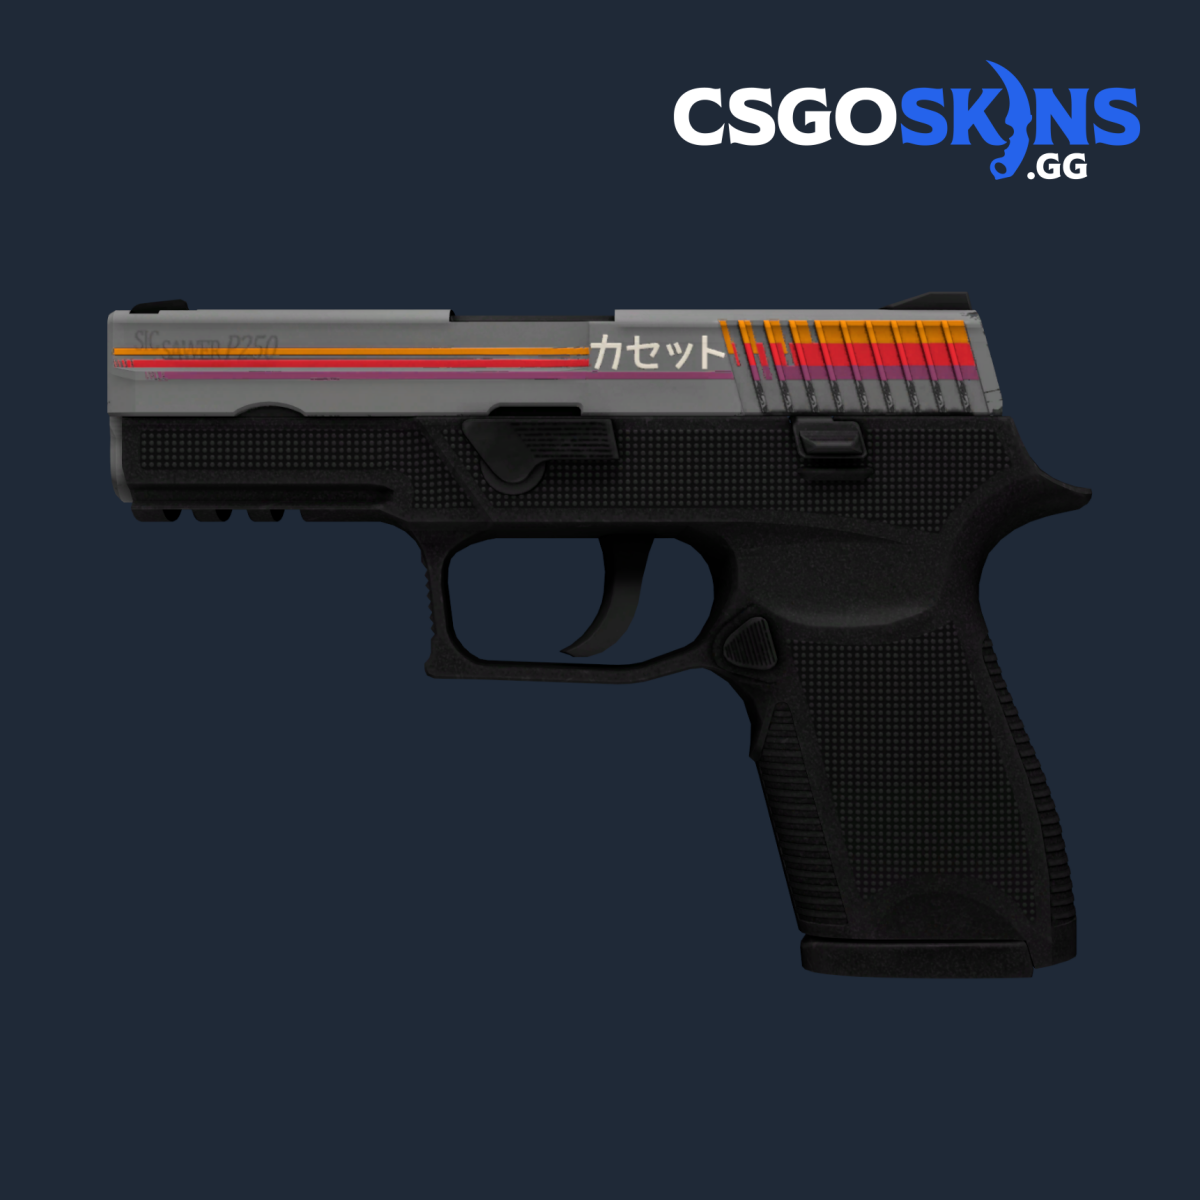 P250 Exchanger cs go skin download the last version for iphone